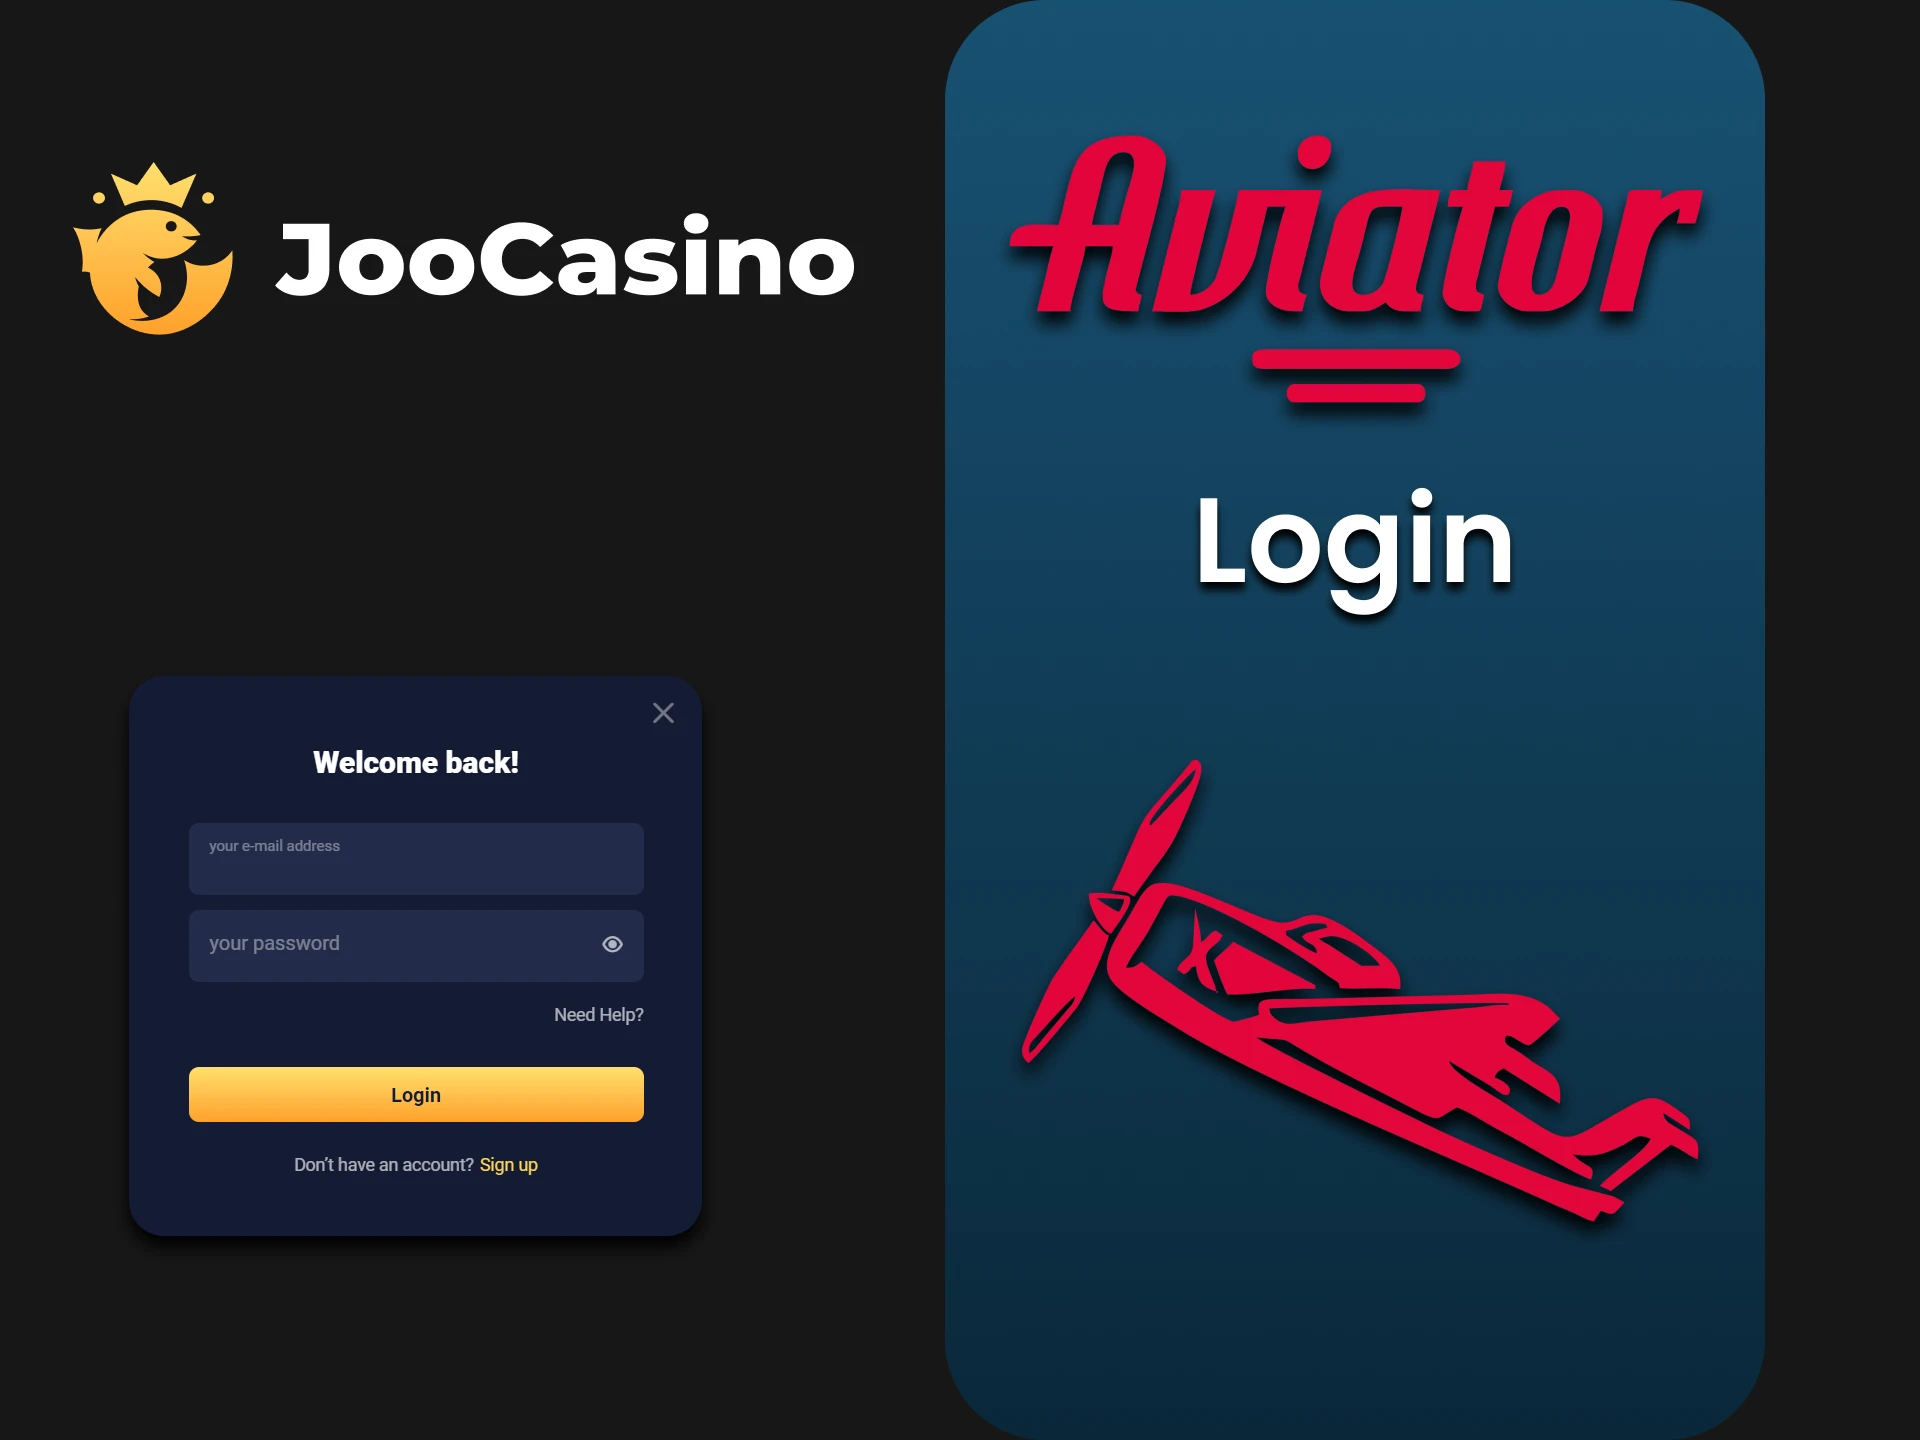 By logging into your Joo Casino account you can play Aviator.